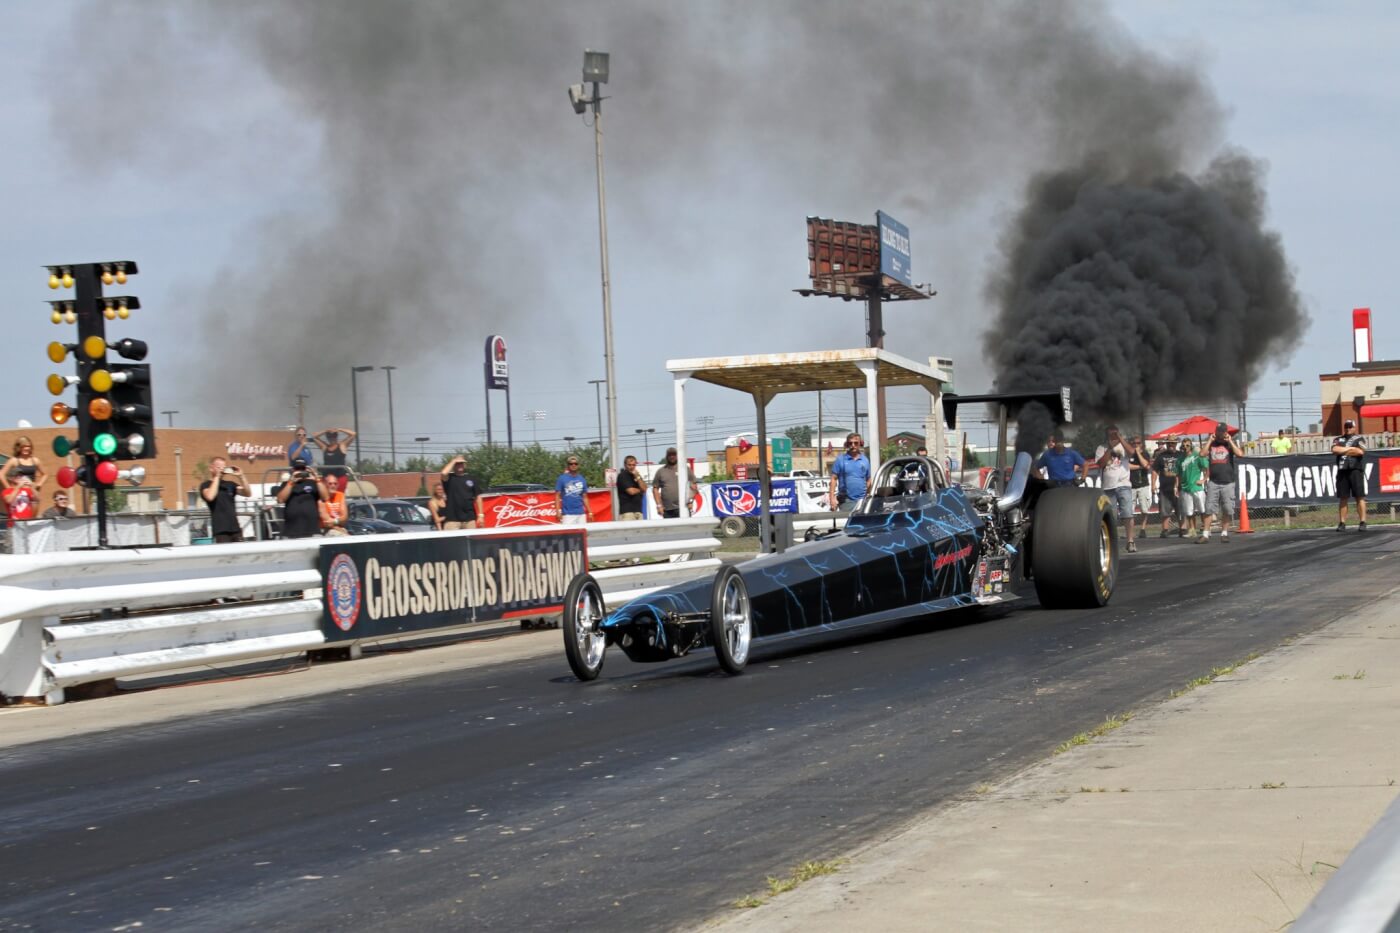 Watching Jared Jones and the Scheid Diesel dragster fly down the track is a thing of beauty for any diesel enthusiast. We caught him in action during one of his four-second exhibition passes down the 1/8-mile strip.